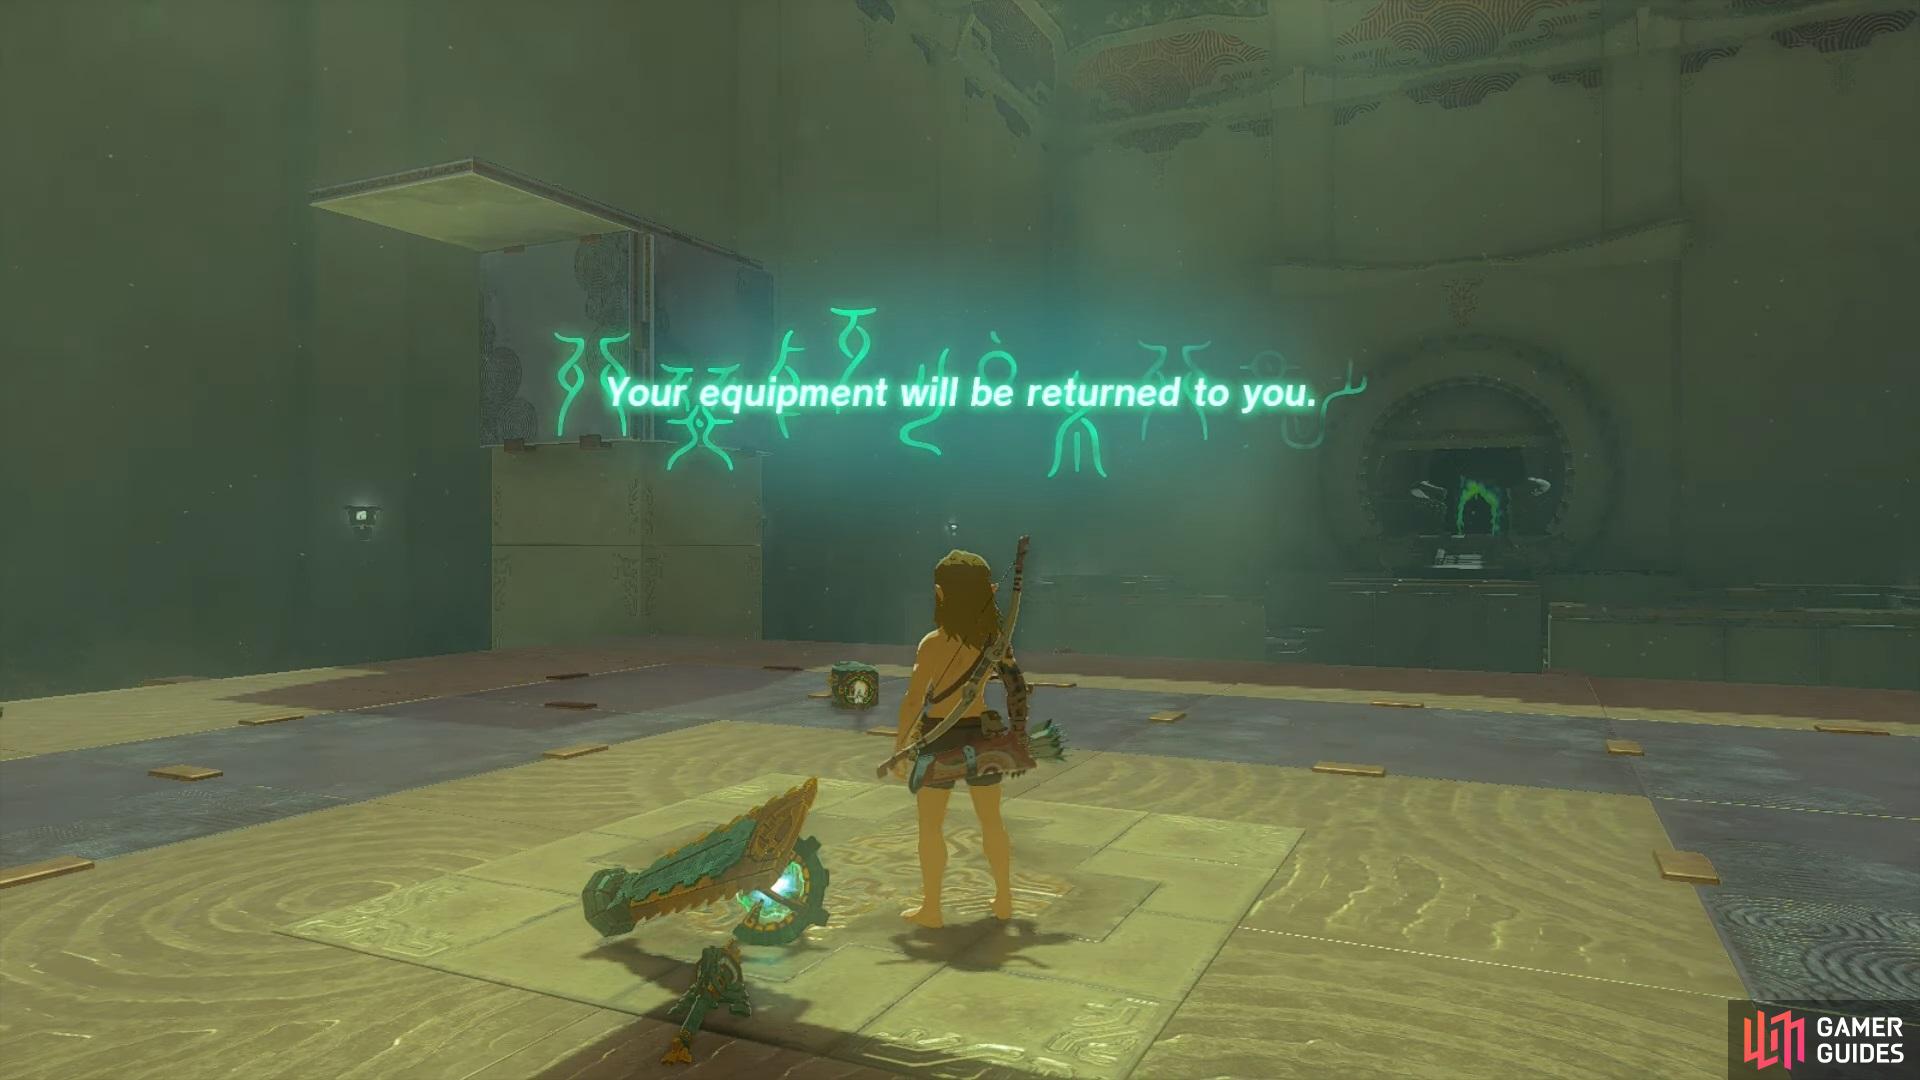 Your equipment being returned after successfully completing the shrine